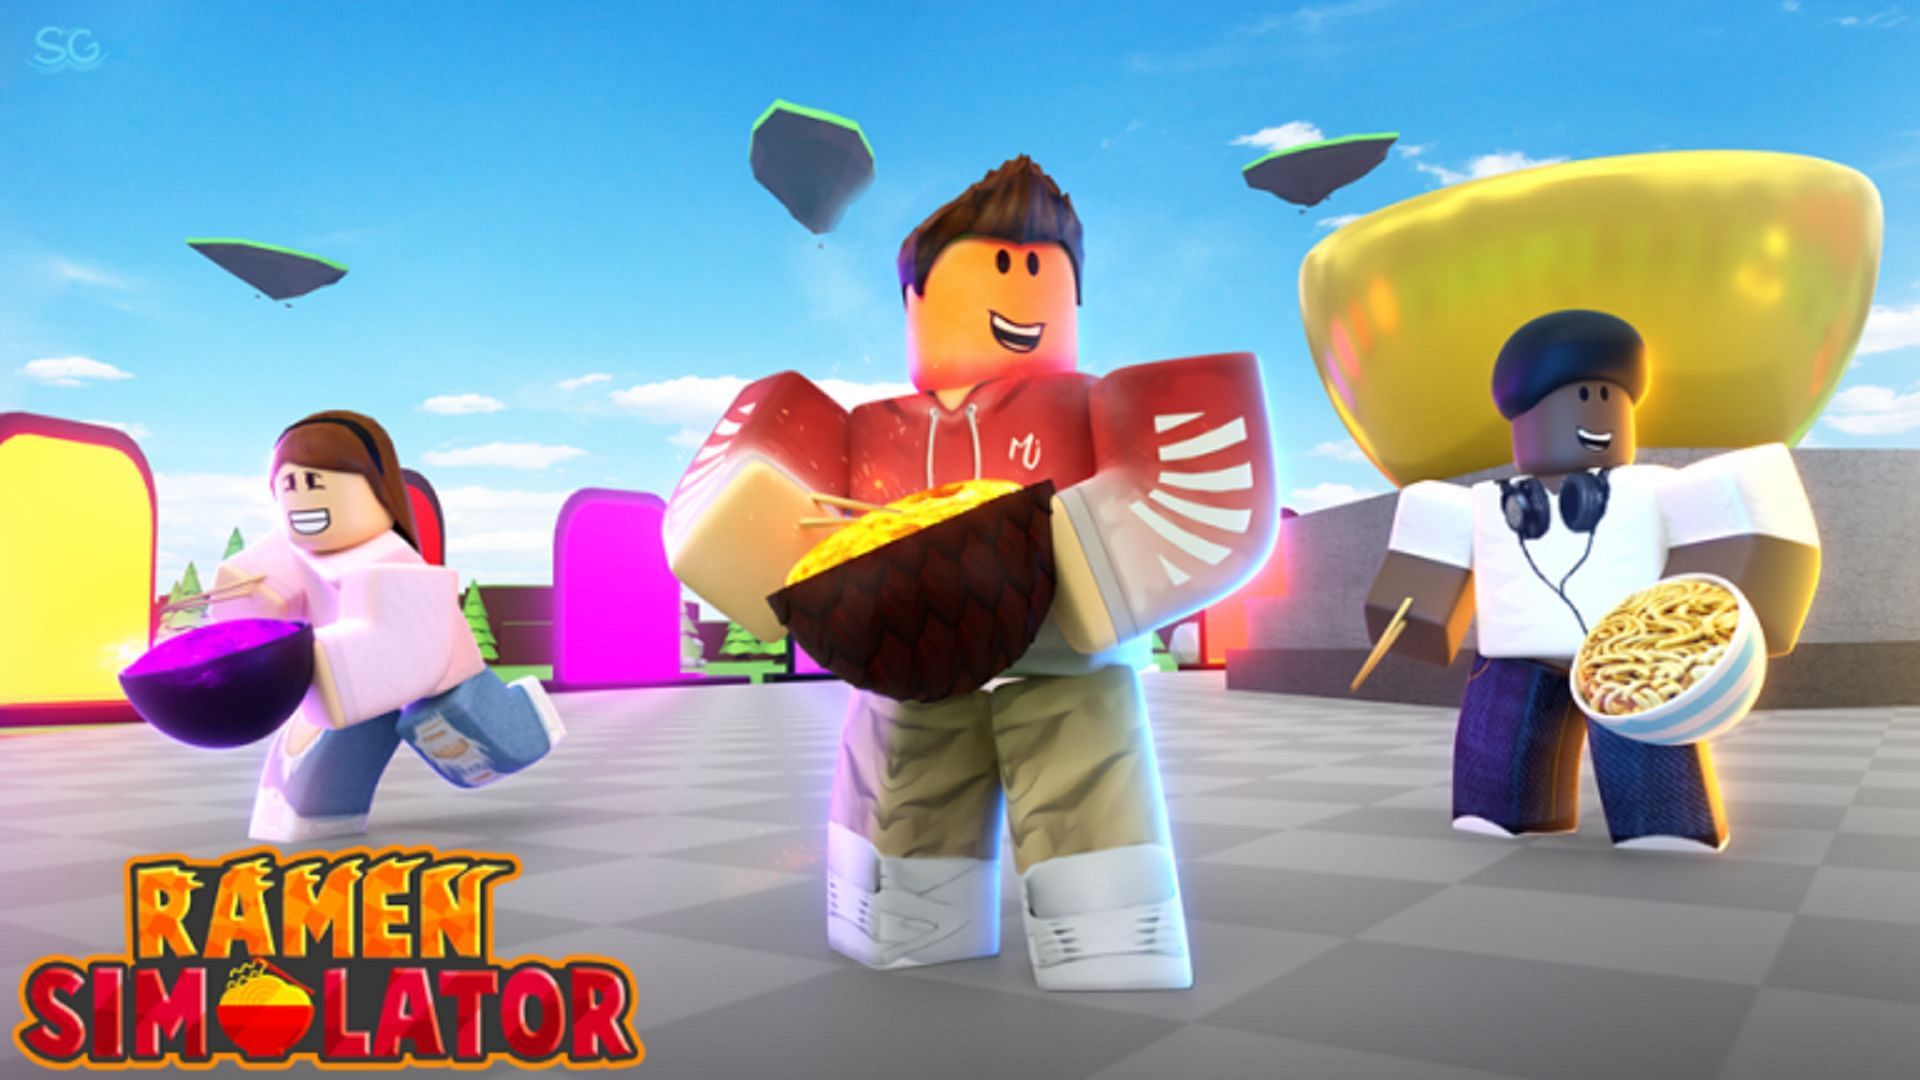 New codes are available for Ramen Simulator (Image via Roblox)